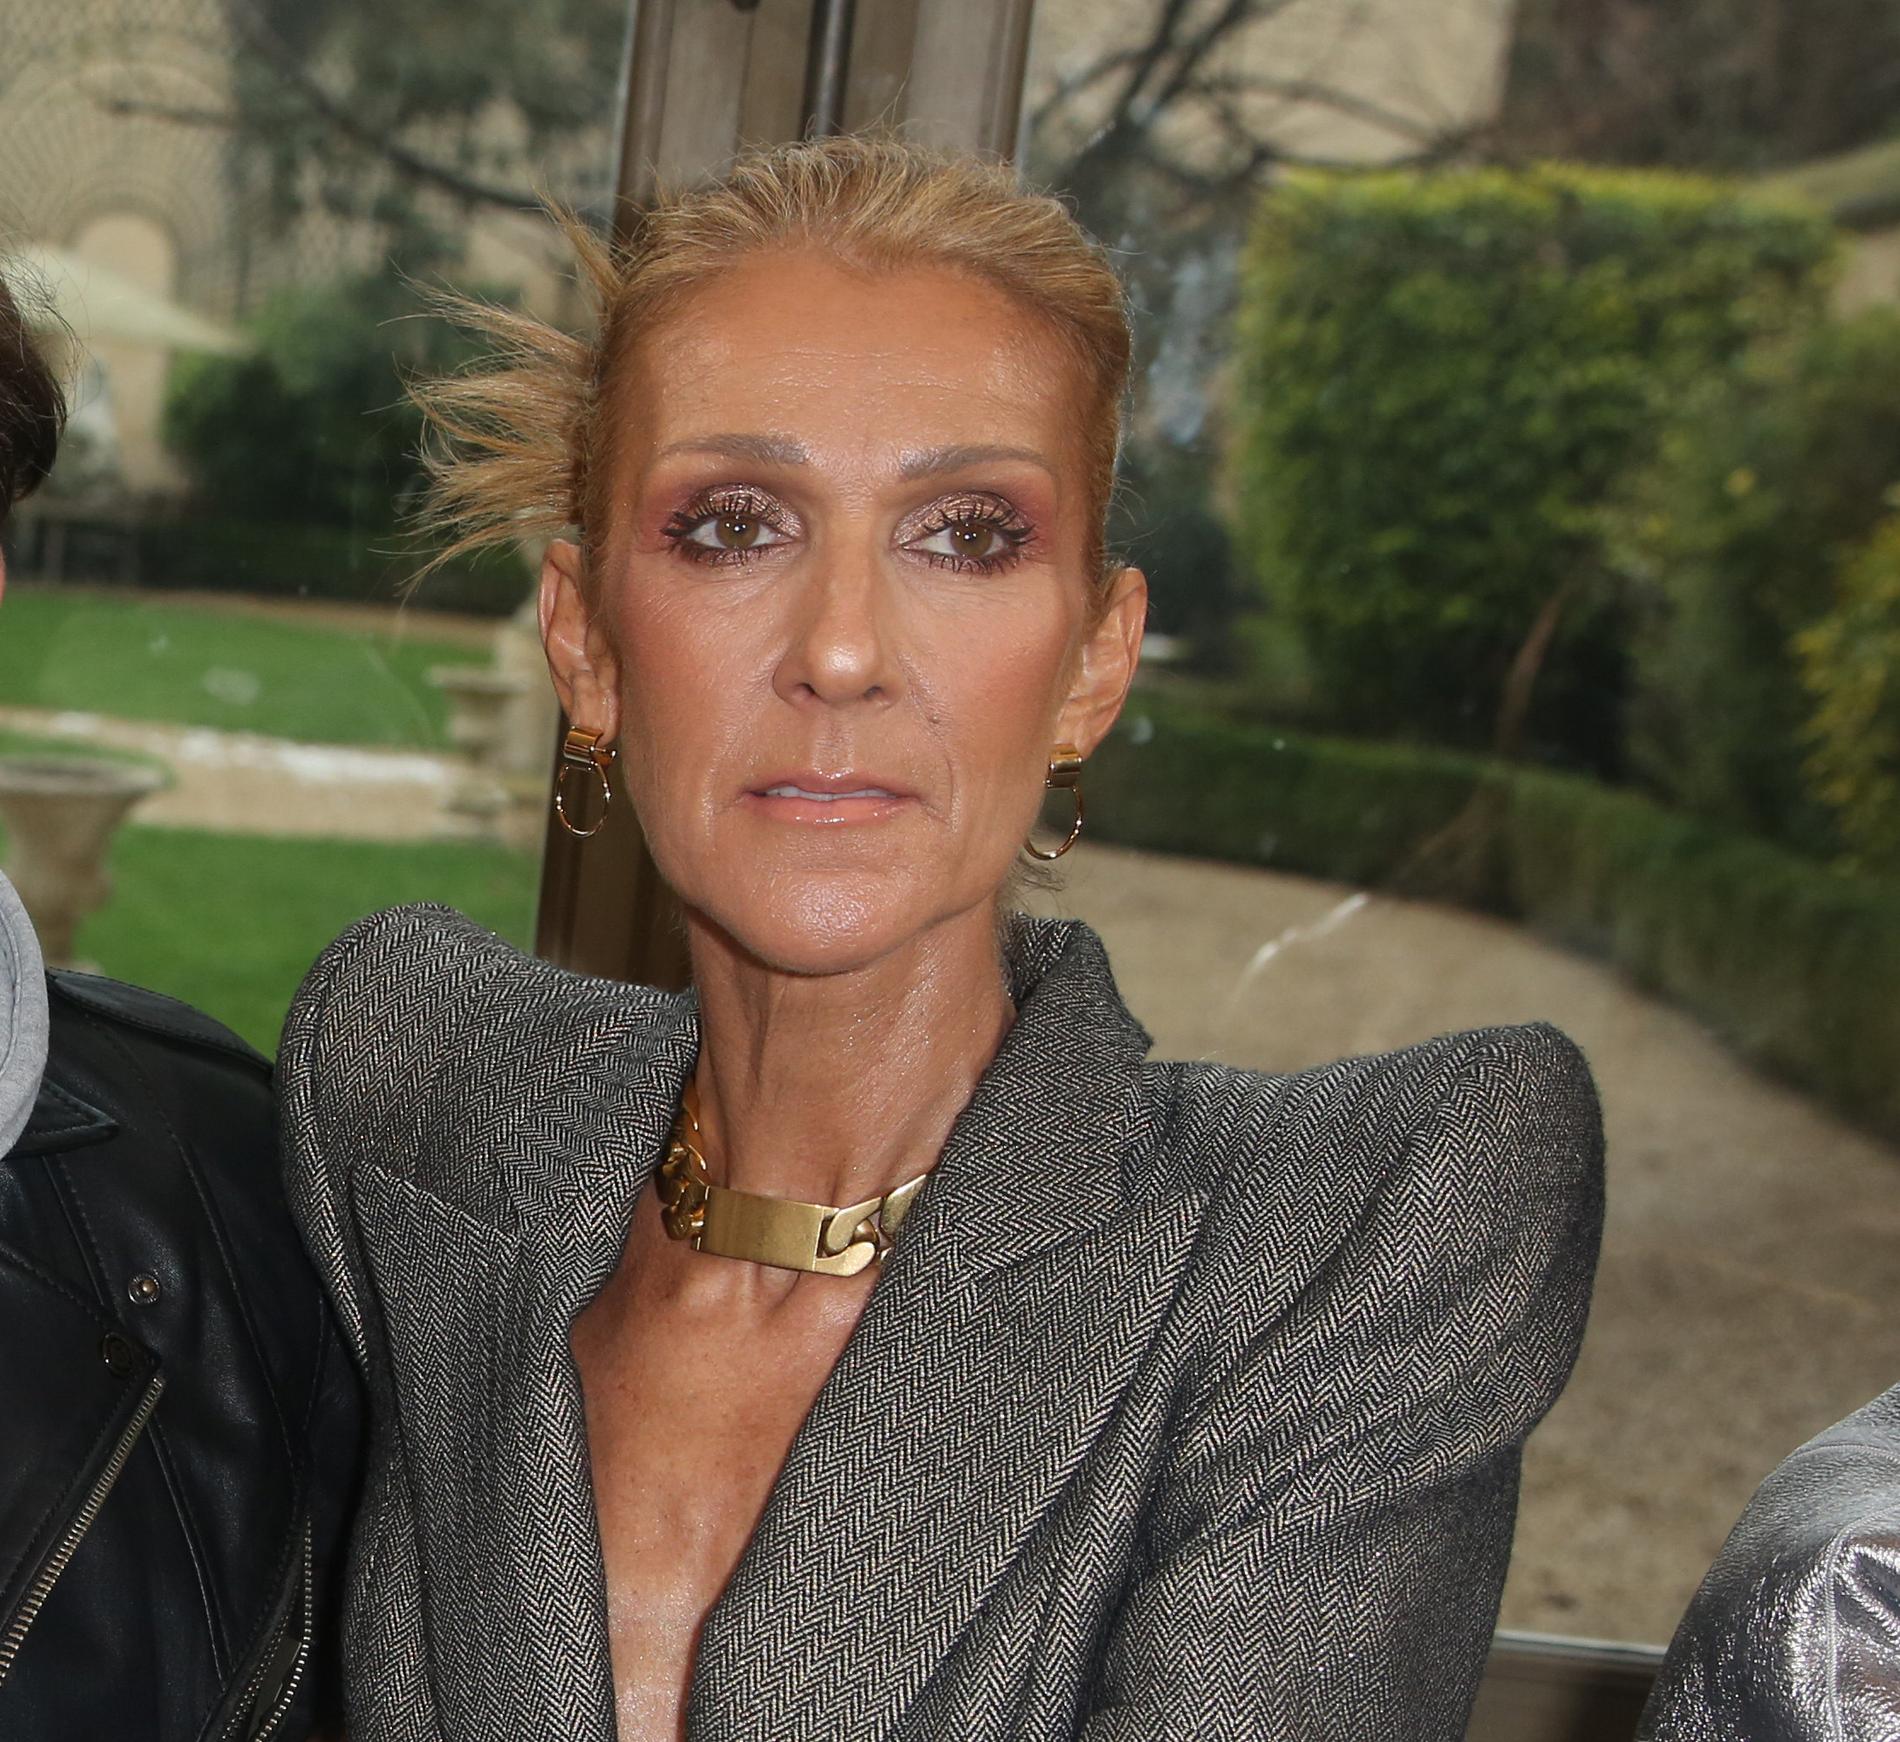 Celine Dion’s sister: – She has no control over her muscles